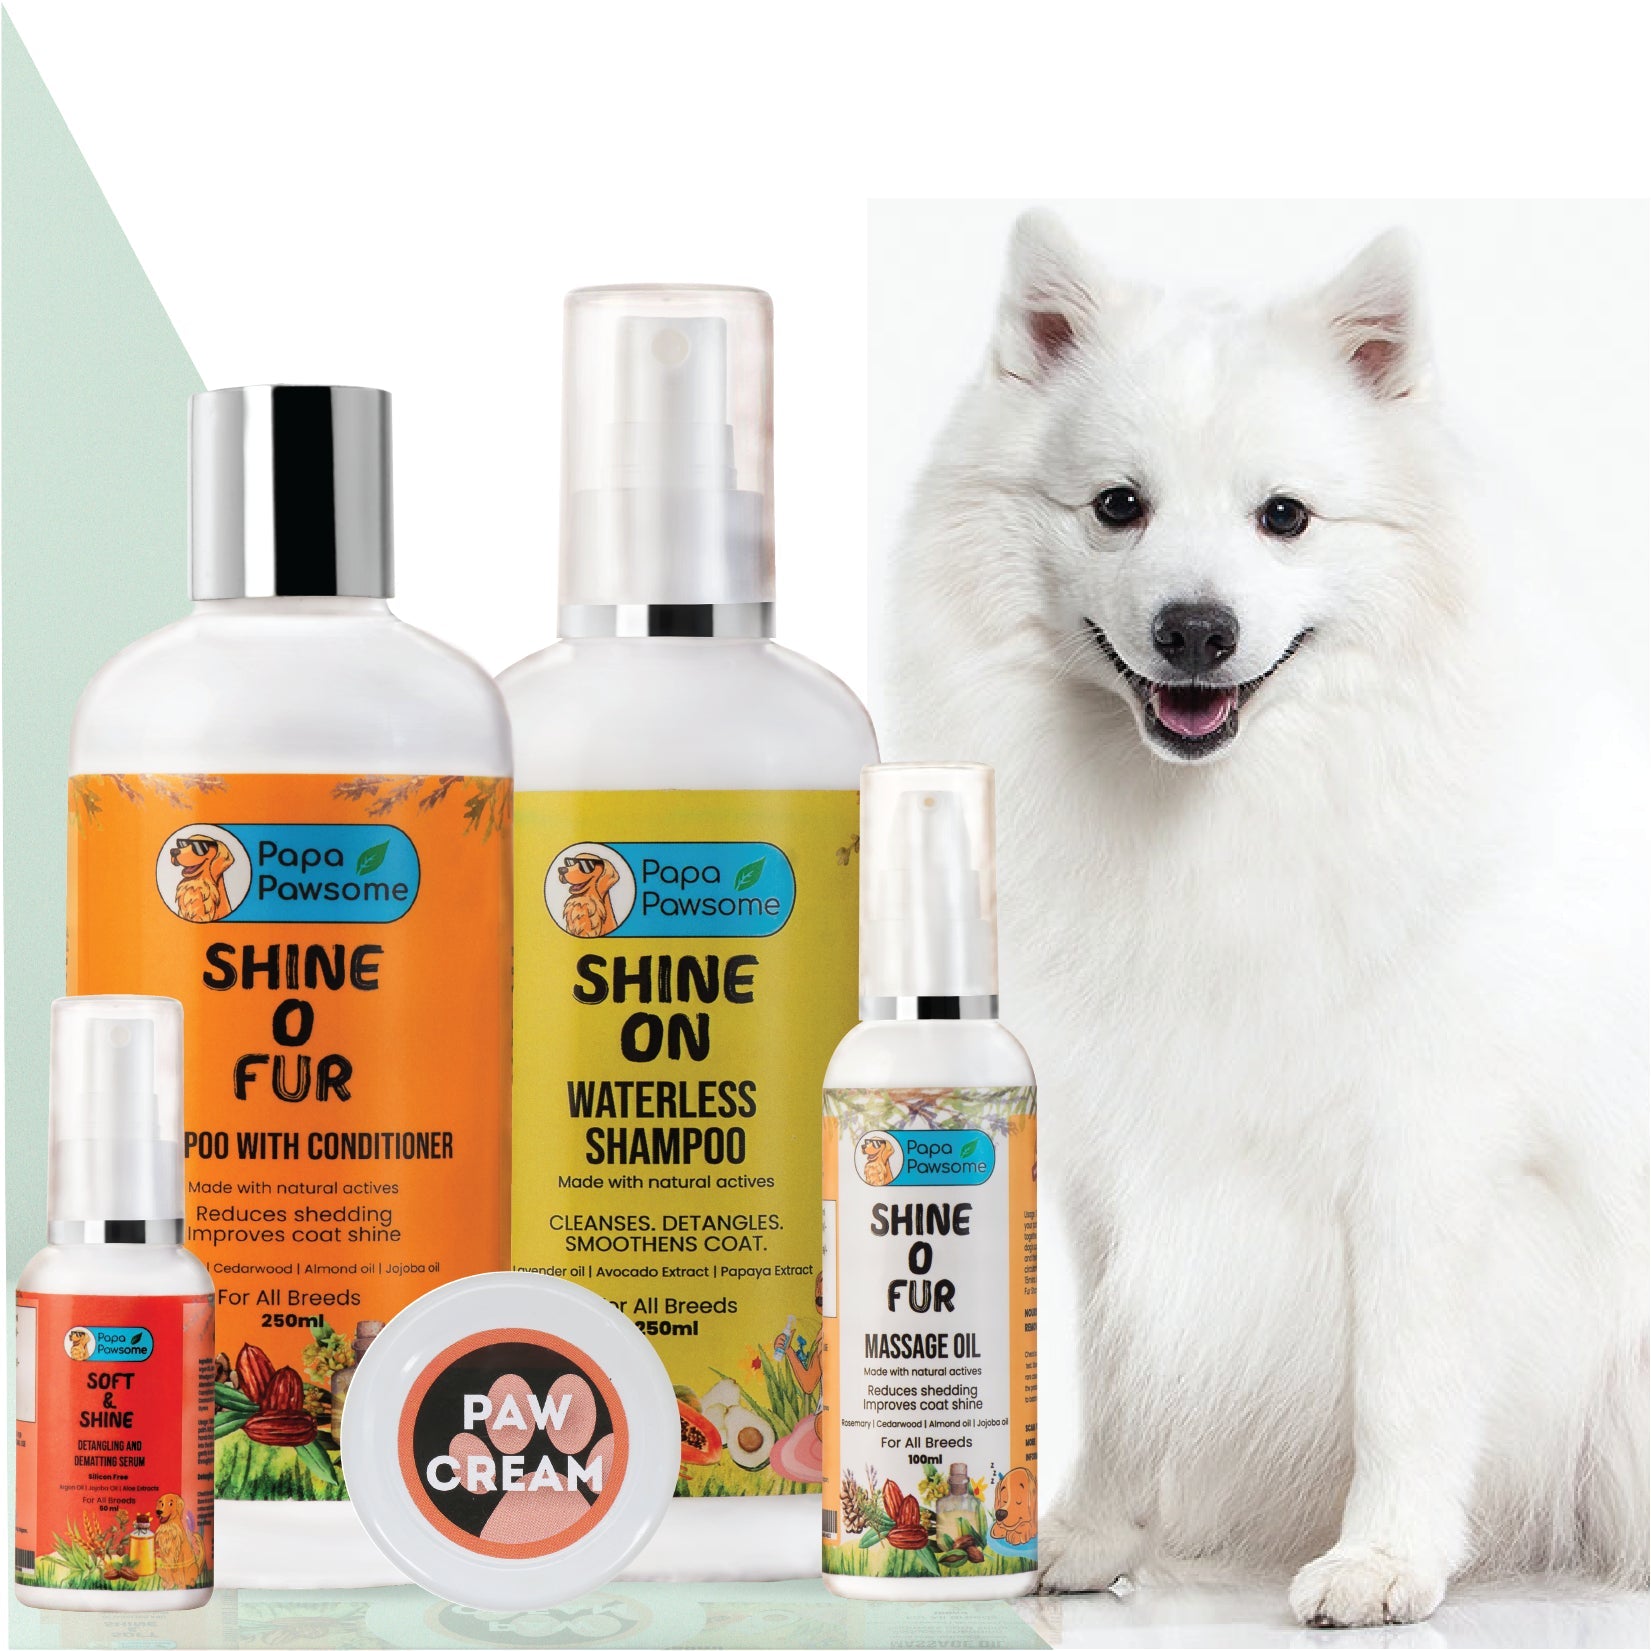 Spitz Complete Grooming kit - Papa Pawsome